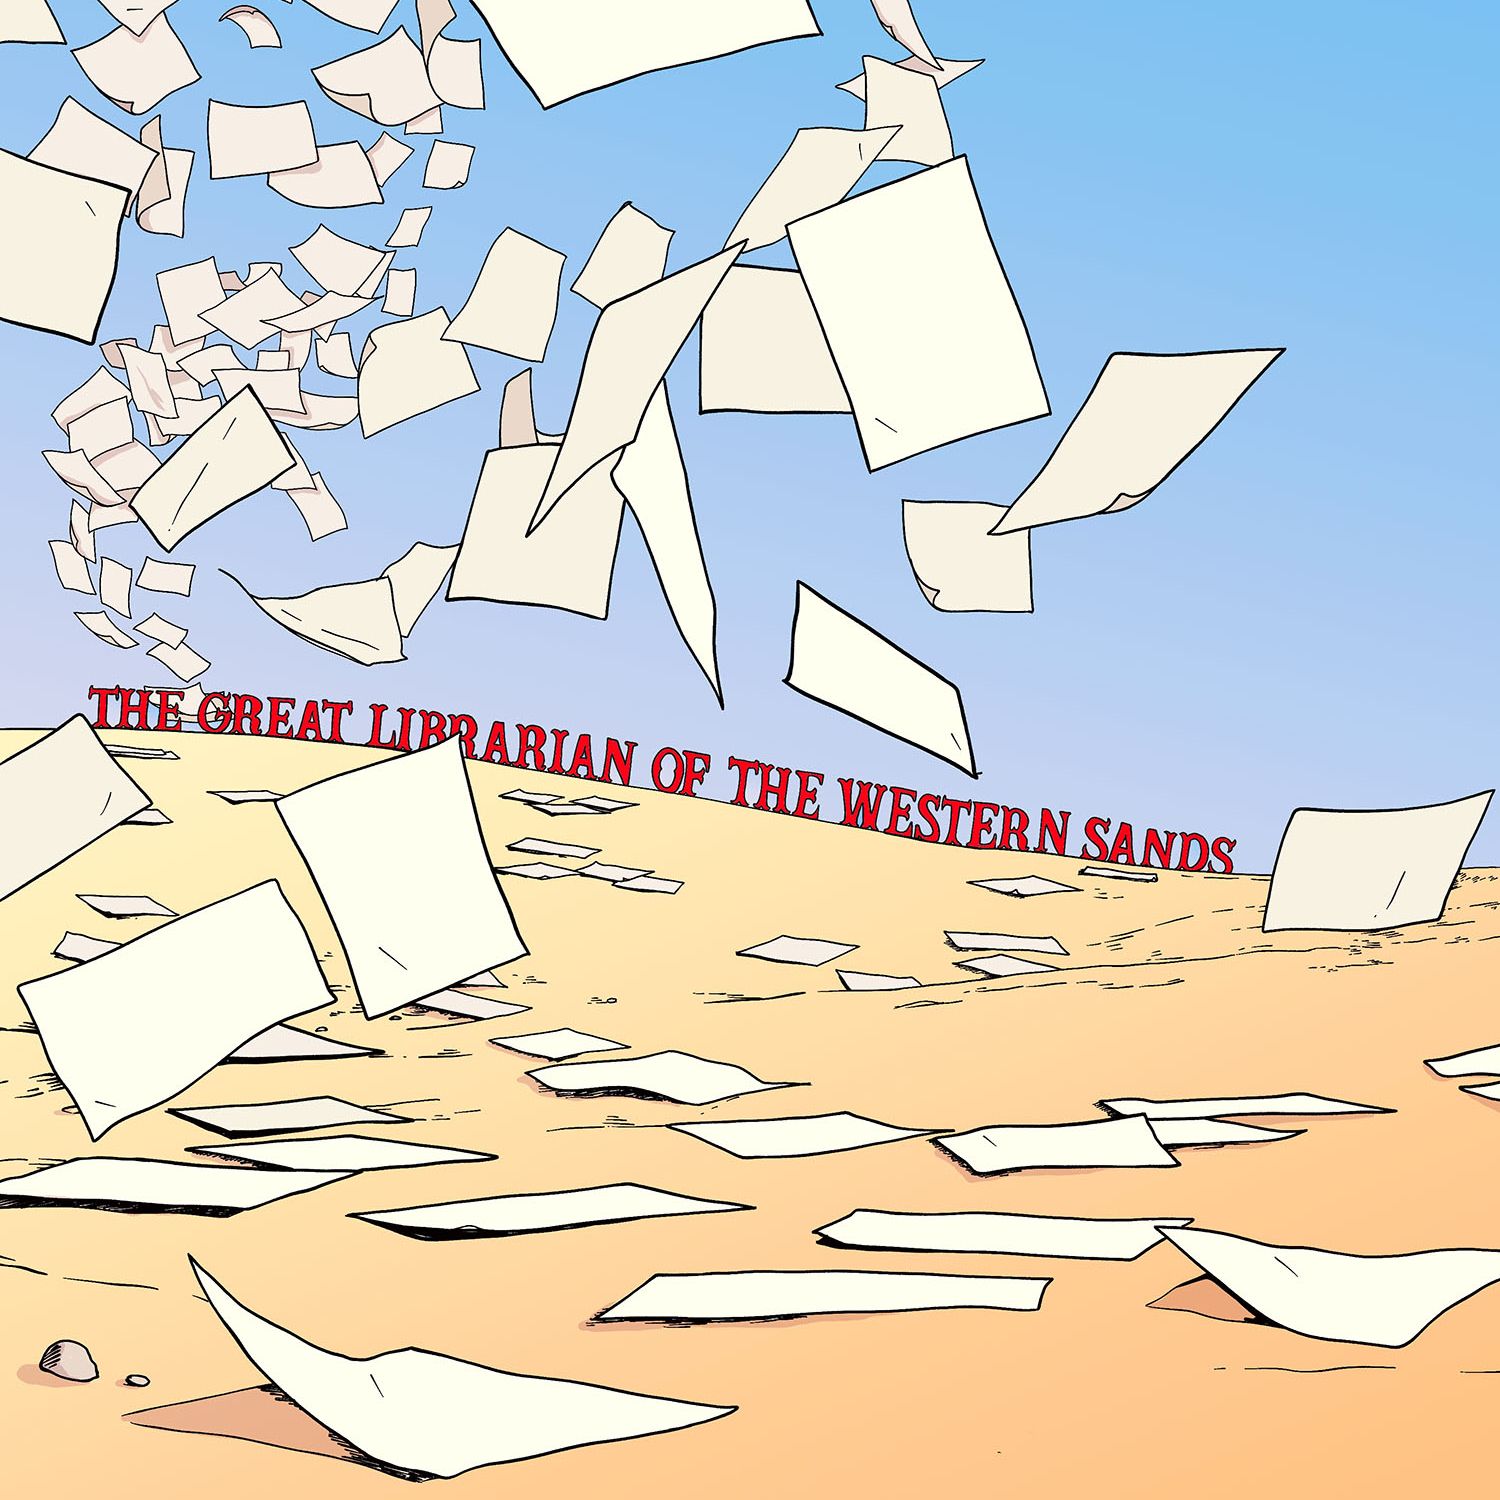 206 - The Great Librarian of the Western Sands